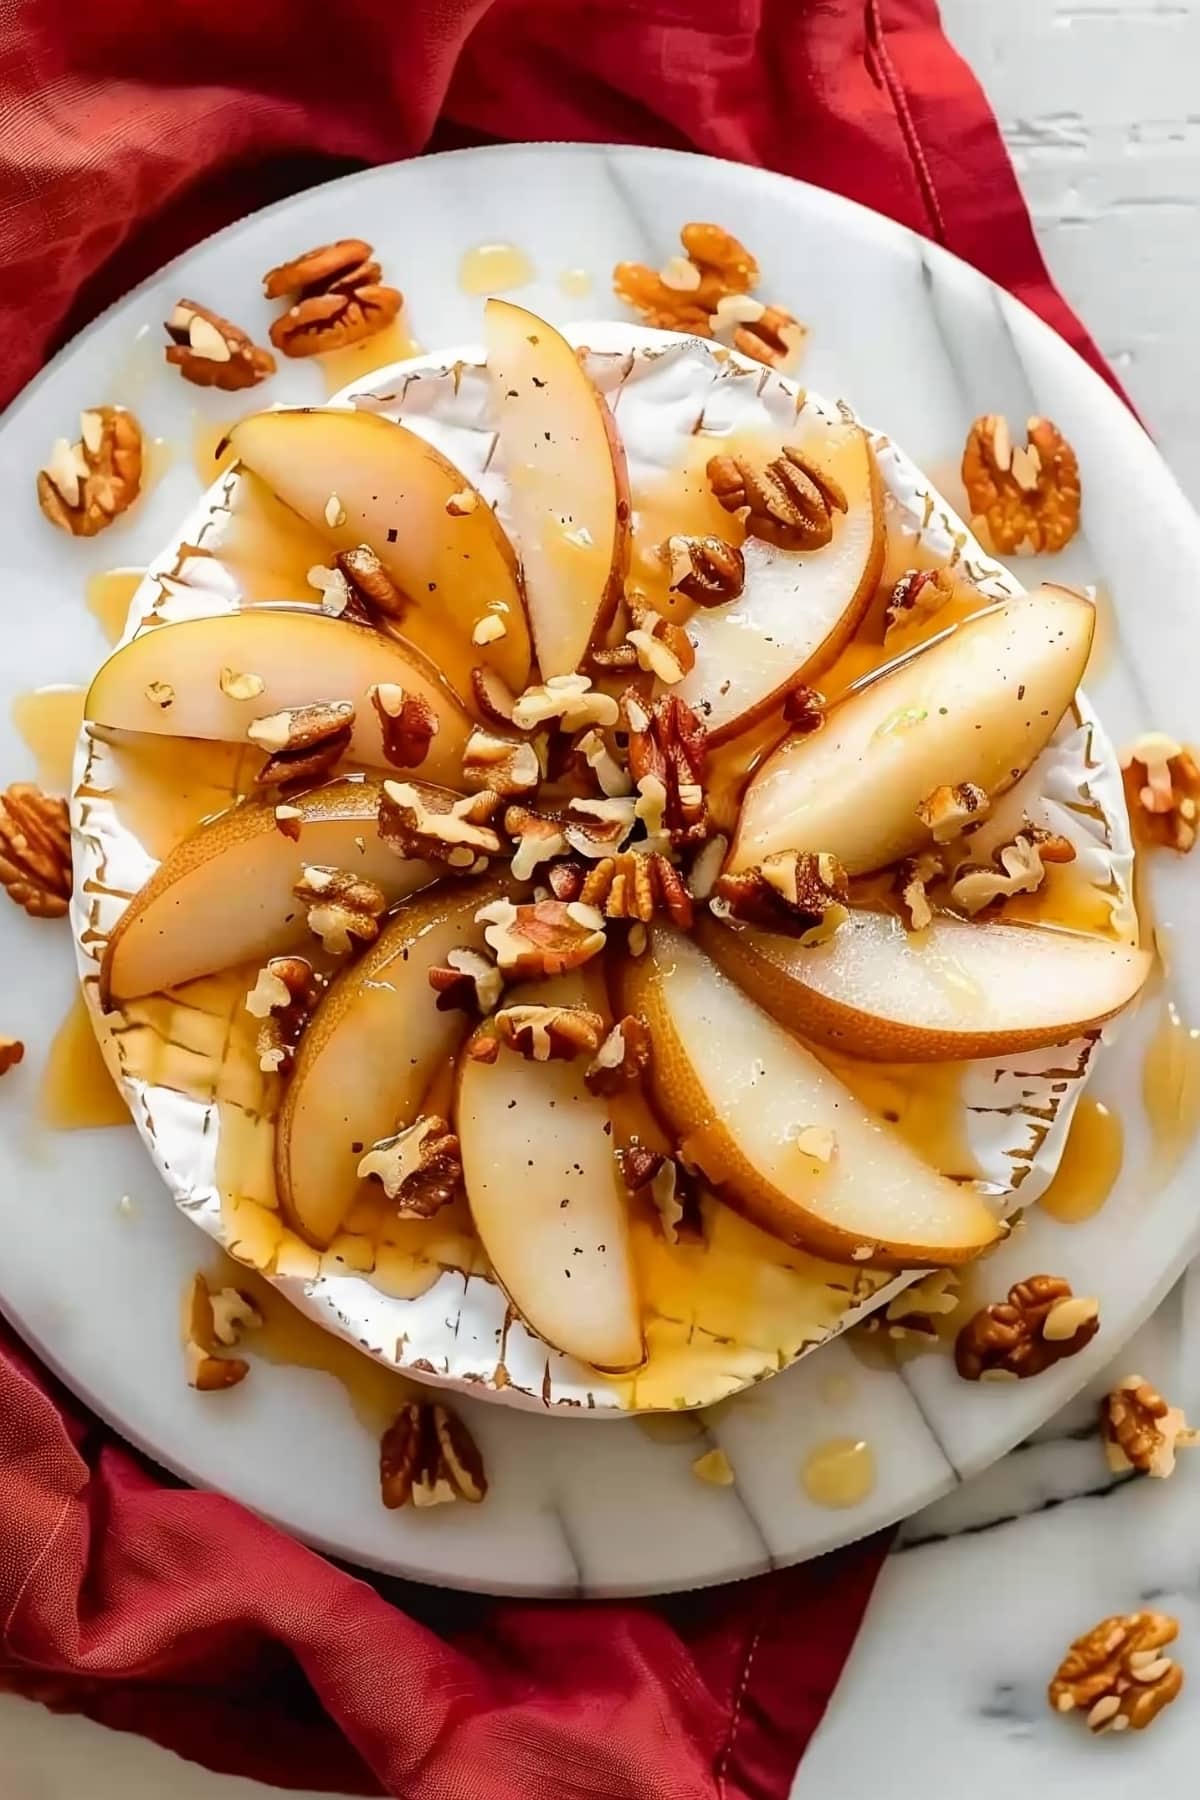 Caramelized pear and baked brie with chopped walnuts, overhead view